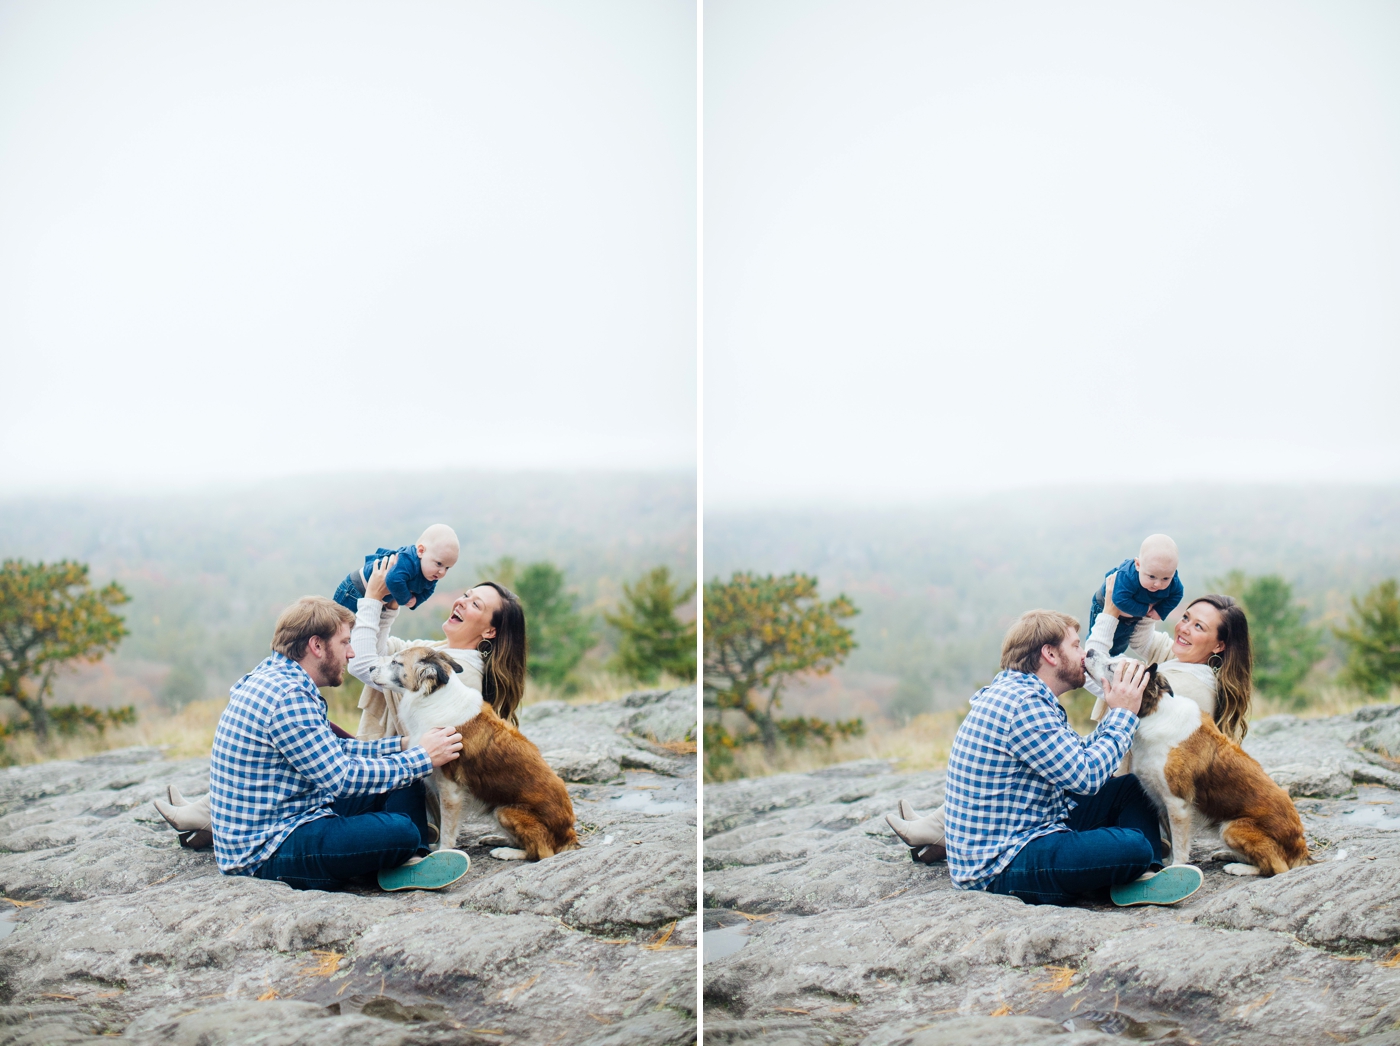 Mountain family session by Izzy and Co. Savannah and Atlanta family photographer.